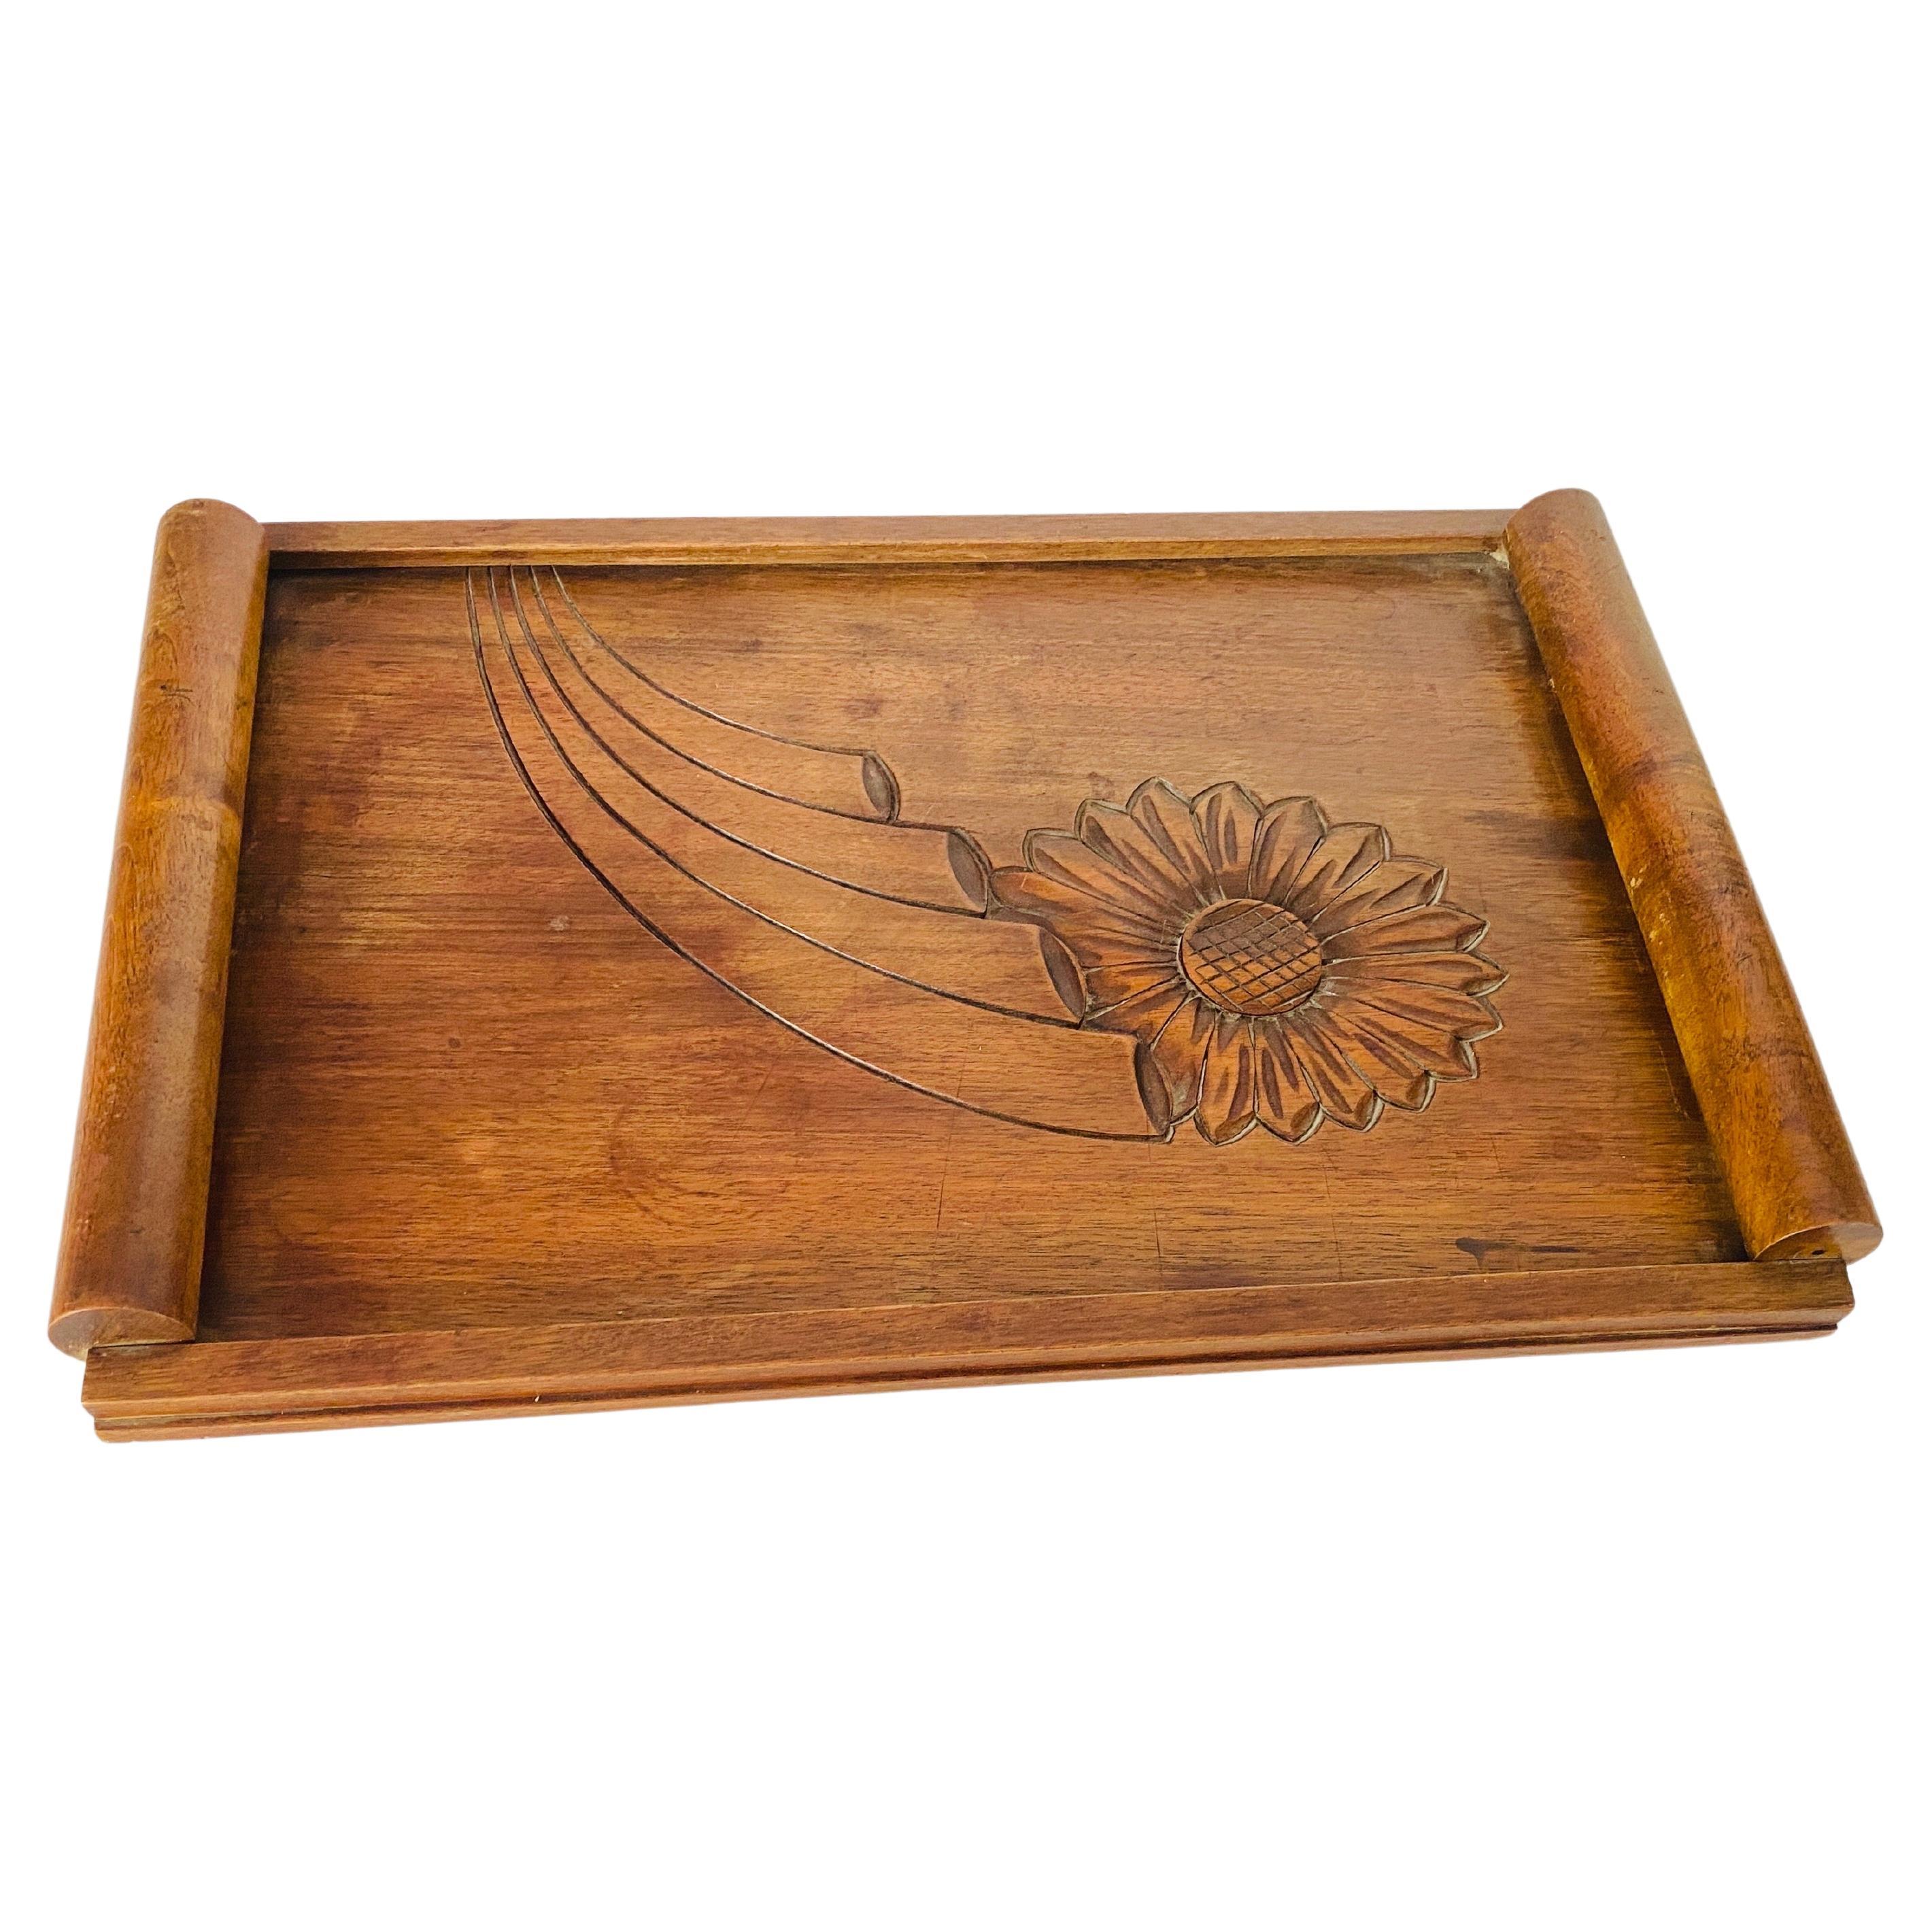 Art Deco Platterin Wood, Brown Color, France circa 1940, Hand Carved